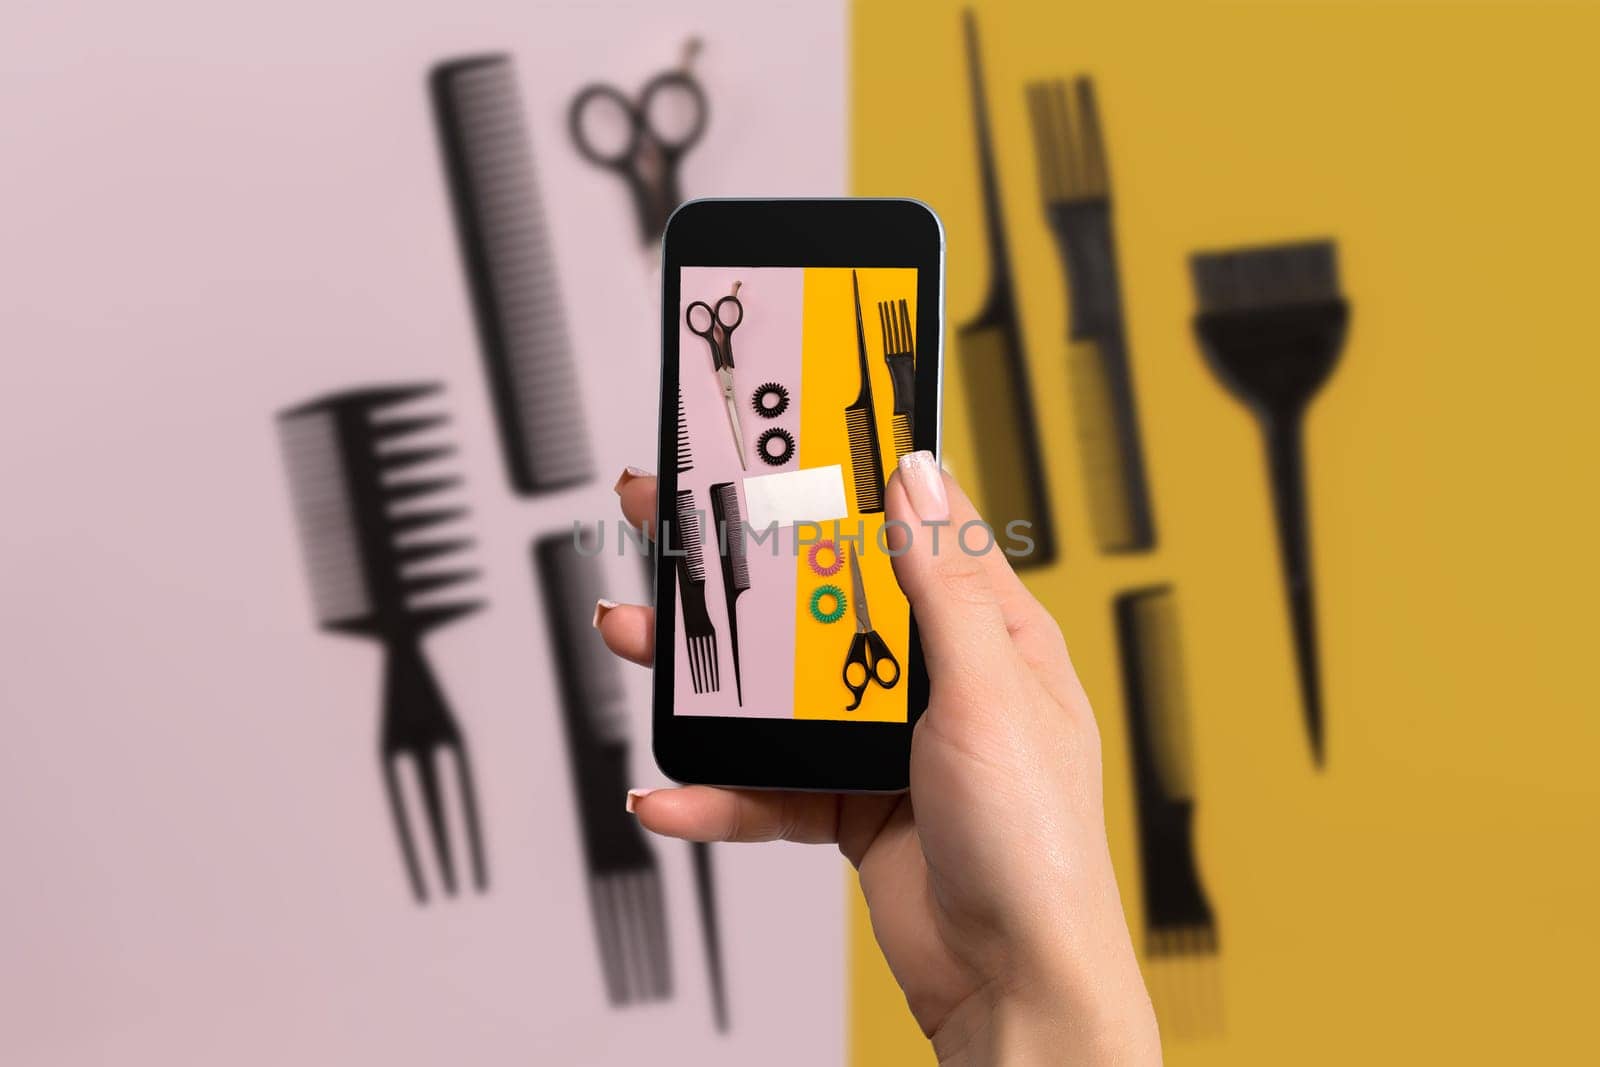 Female hand with a smartphone makes a photo set of combs on pink and yellow background. Still life. Flat lay